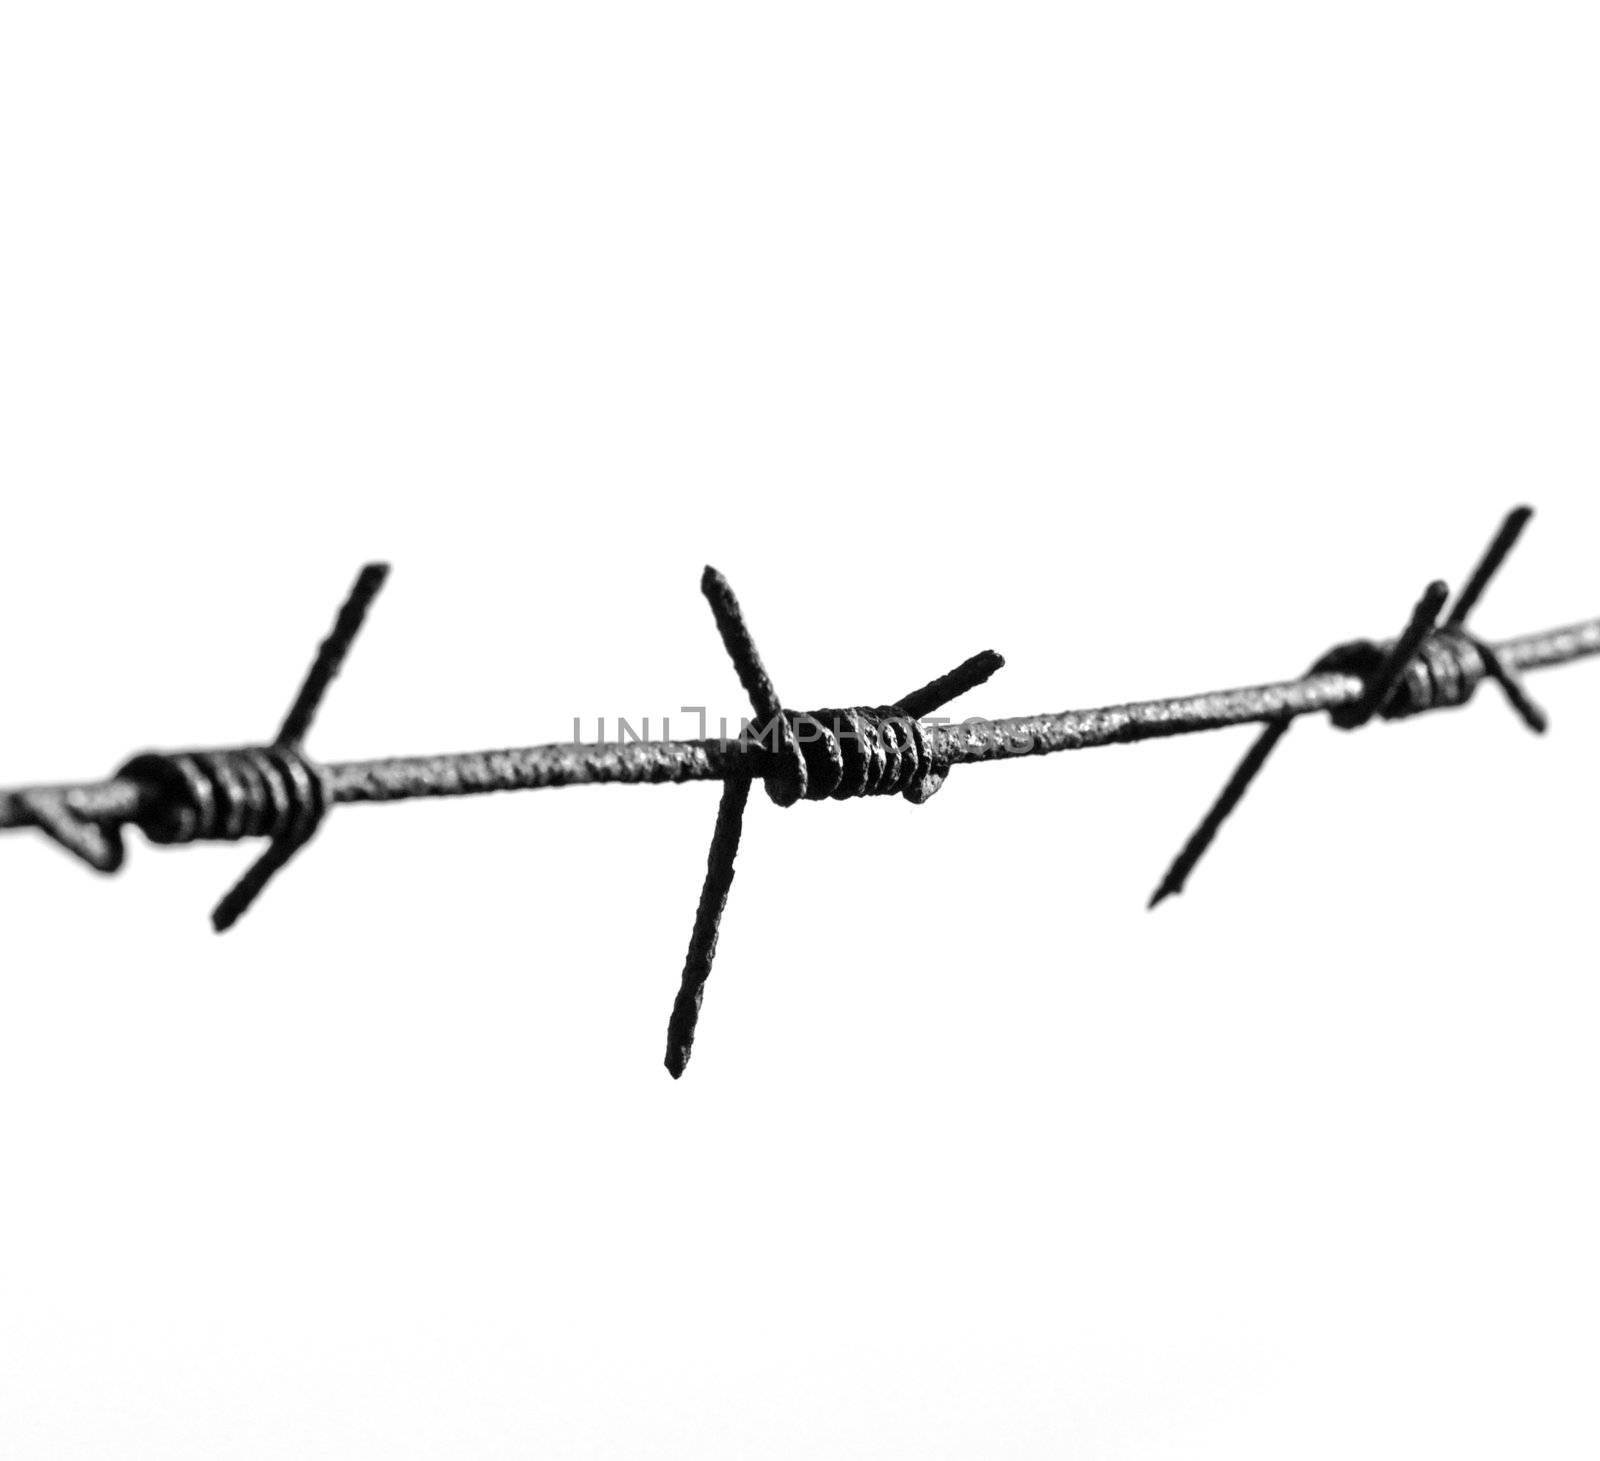 The barbed wire is isolated on a background of the white 